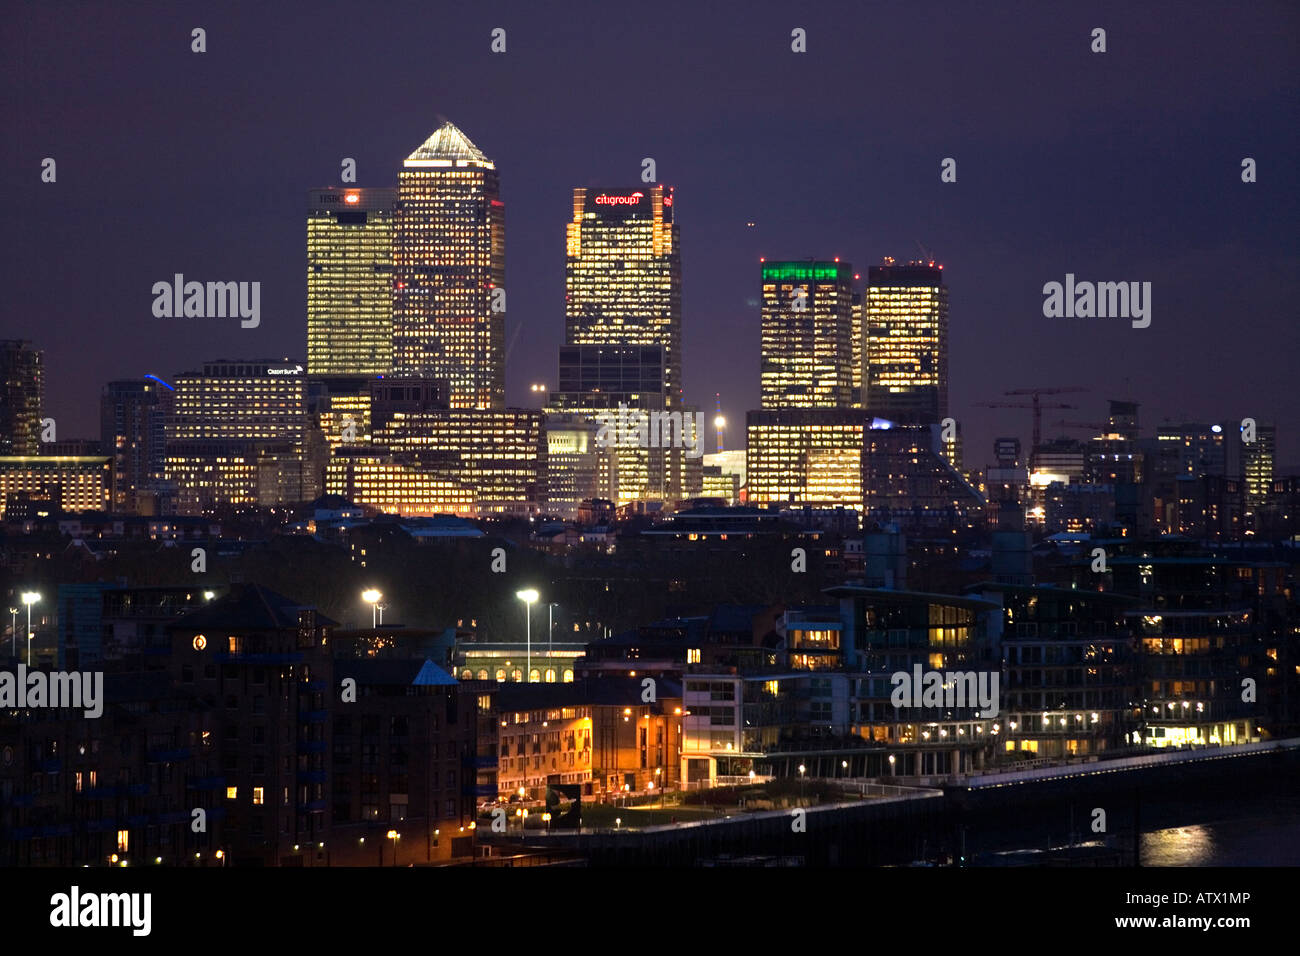 Docklands and Canary Wharf seen at night. London. UK Stock Photo